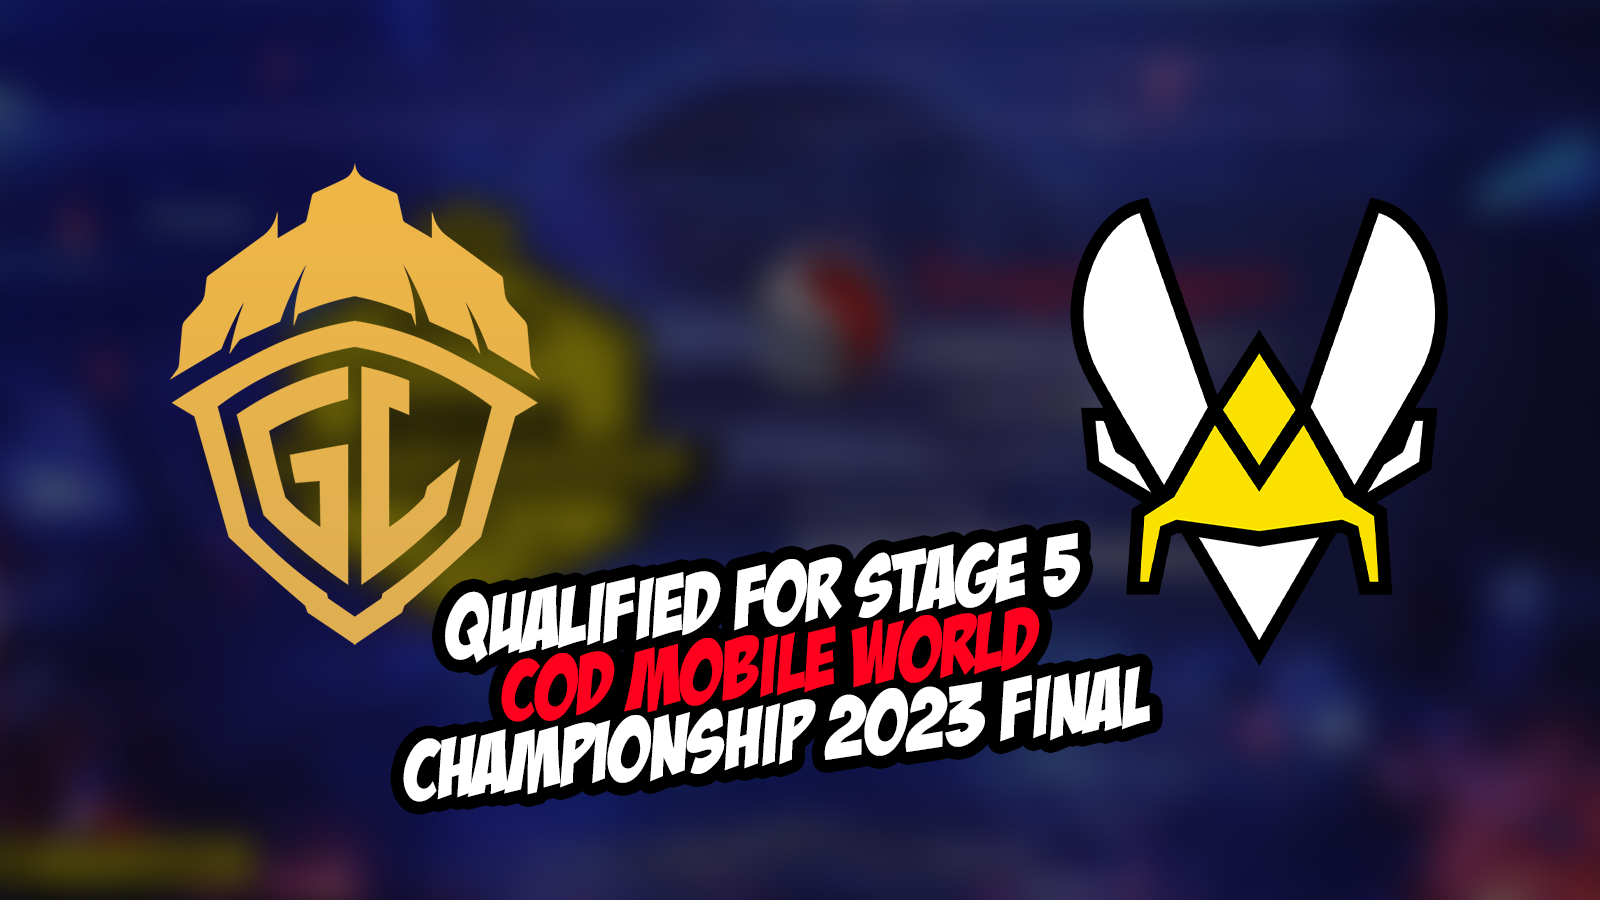 GodLike and Team Vitality Qualify for Stage 5 COD Mobile World Championship 2023 Final